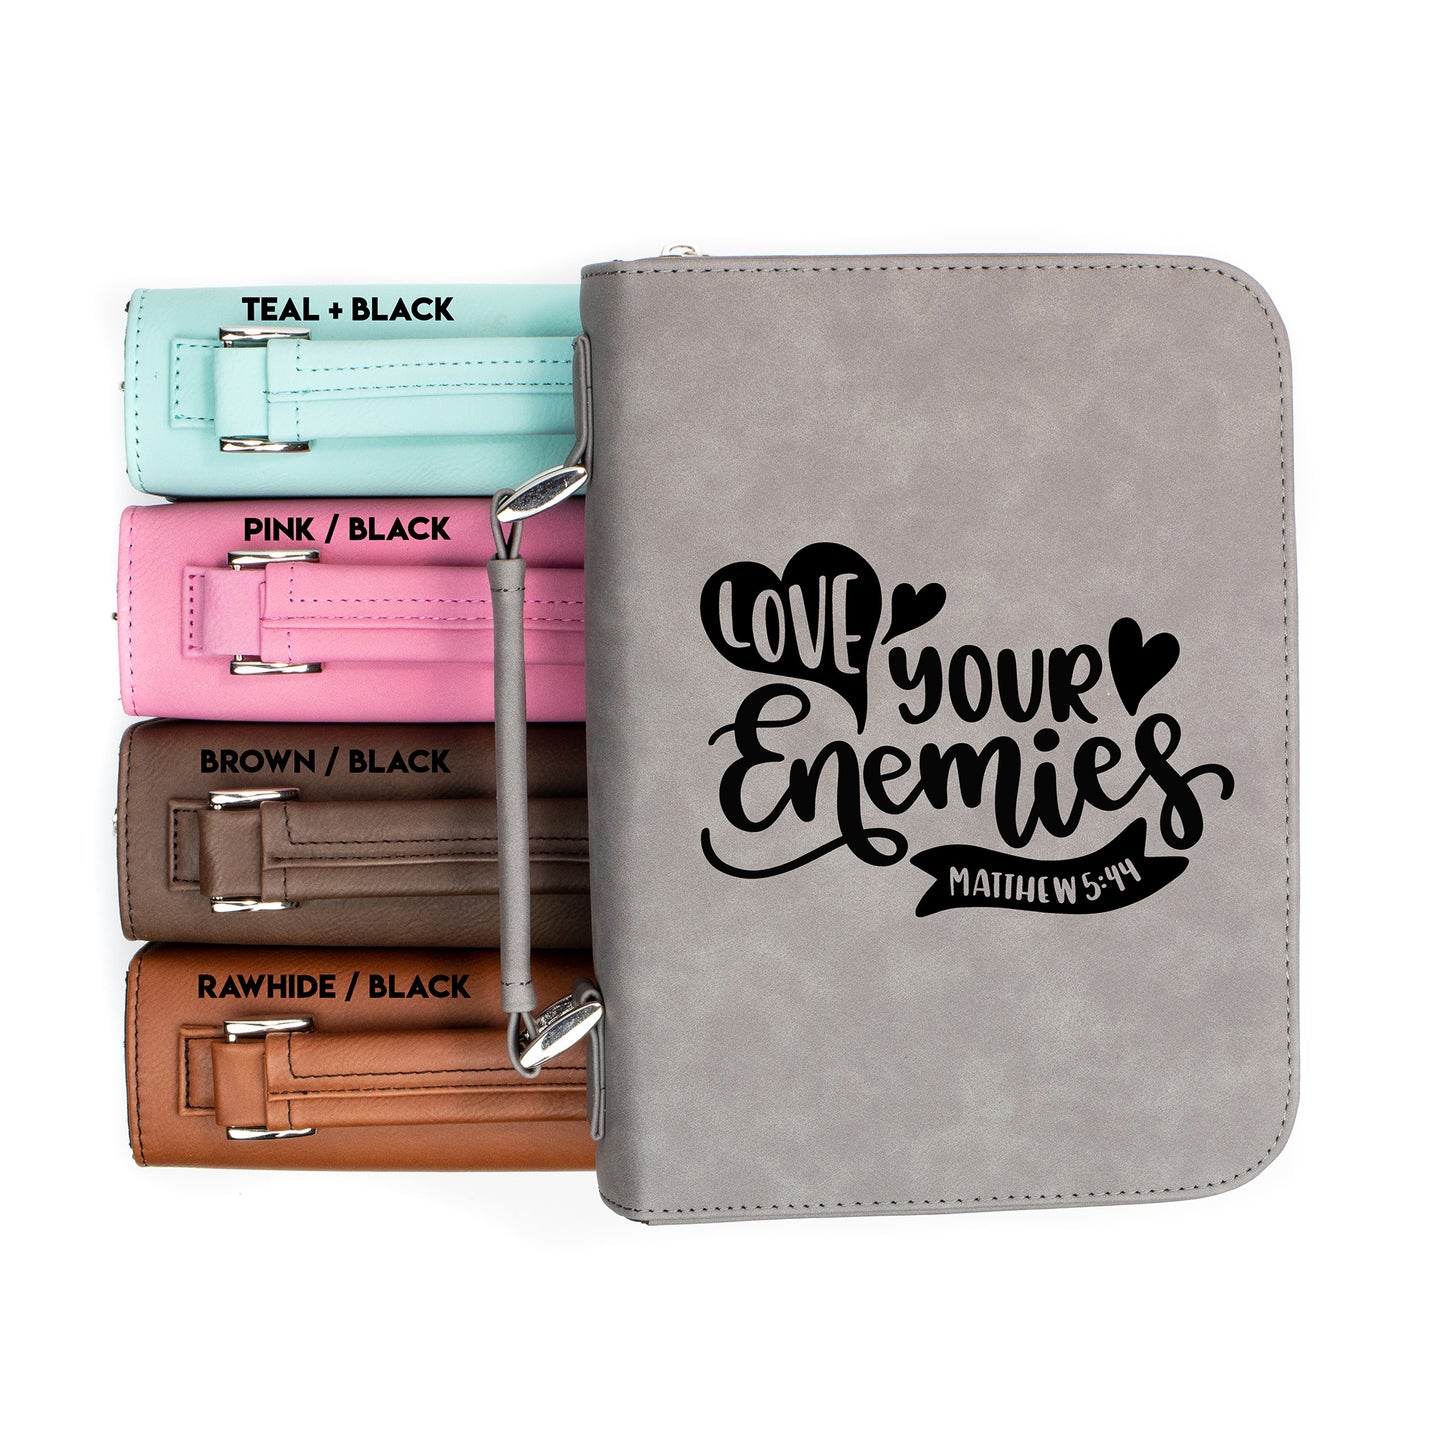 Love Your Enemies - Matthew 5:44 - Bible Book Cover | Faux Leather With Handle + Pockets